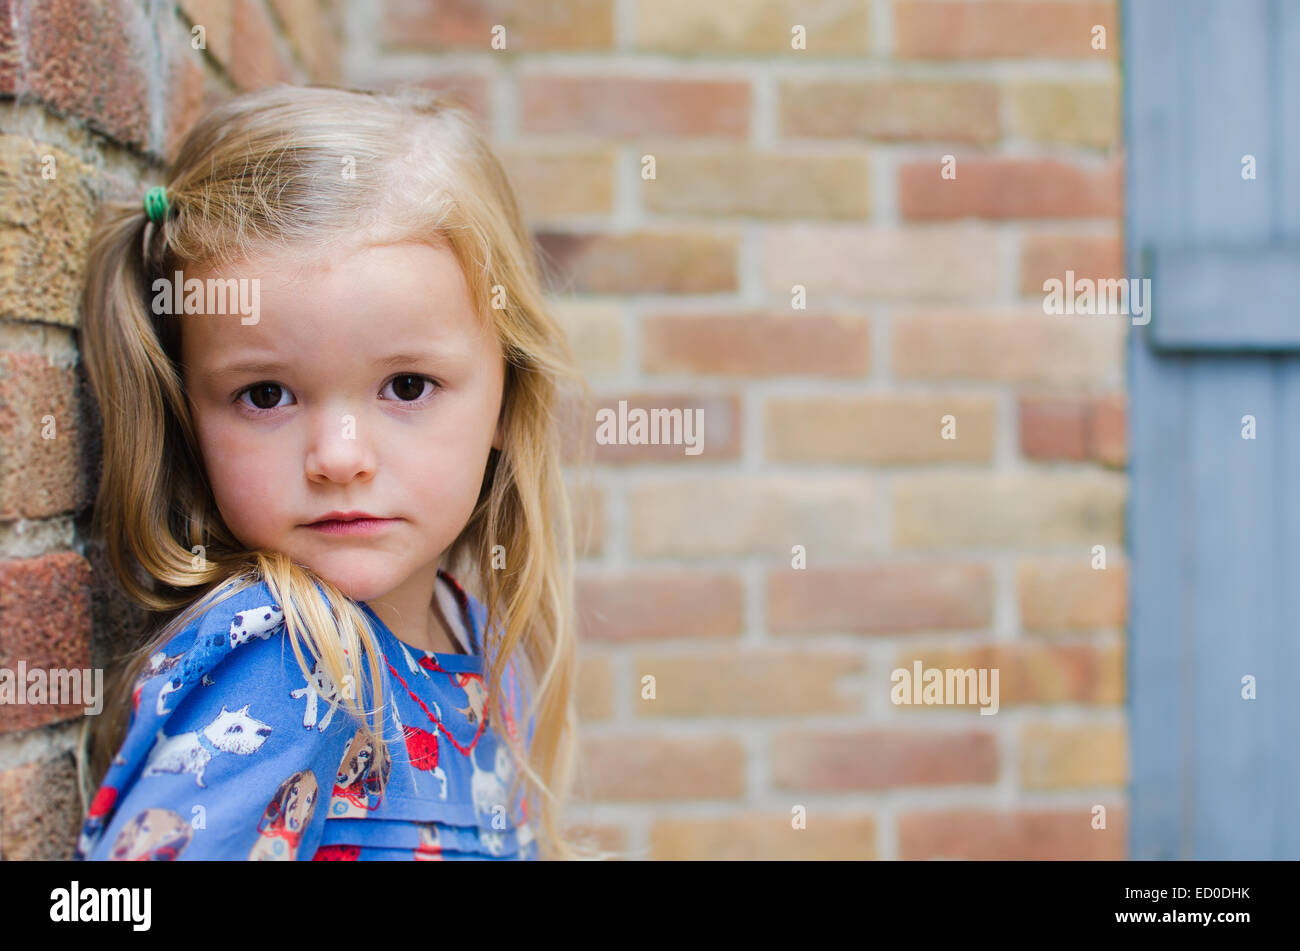 Portrait of Girl leaning against brick wall Banque D'Images